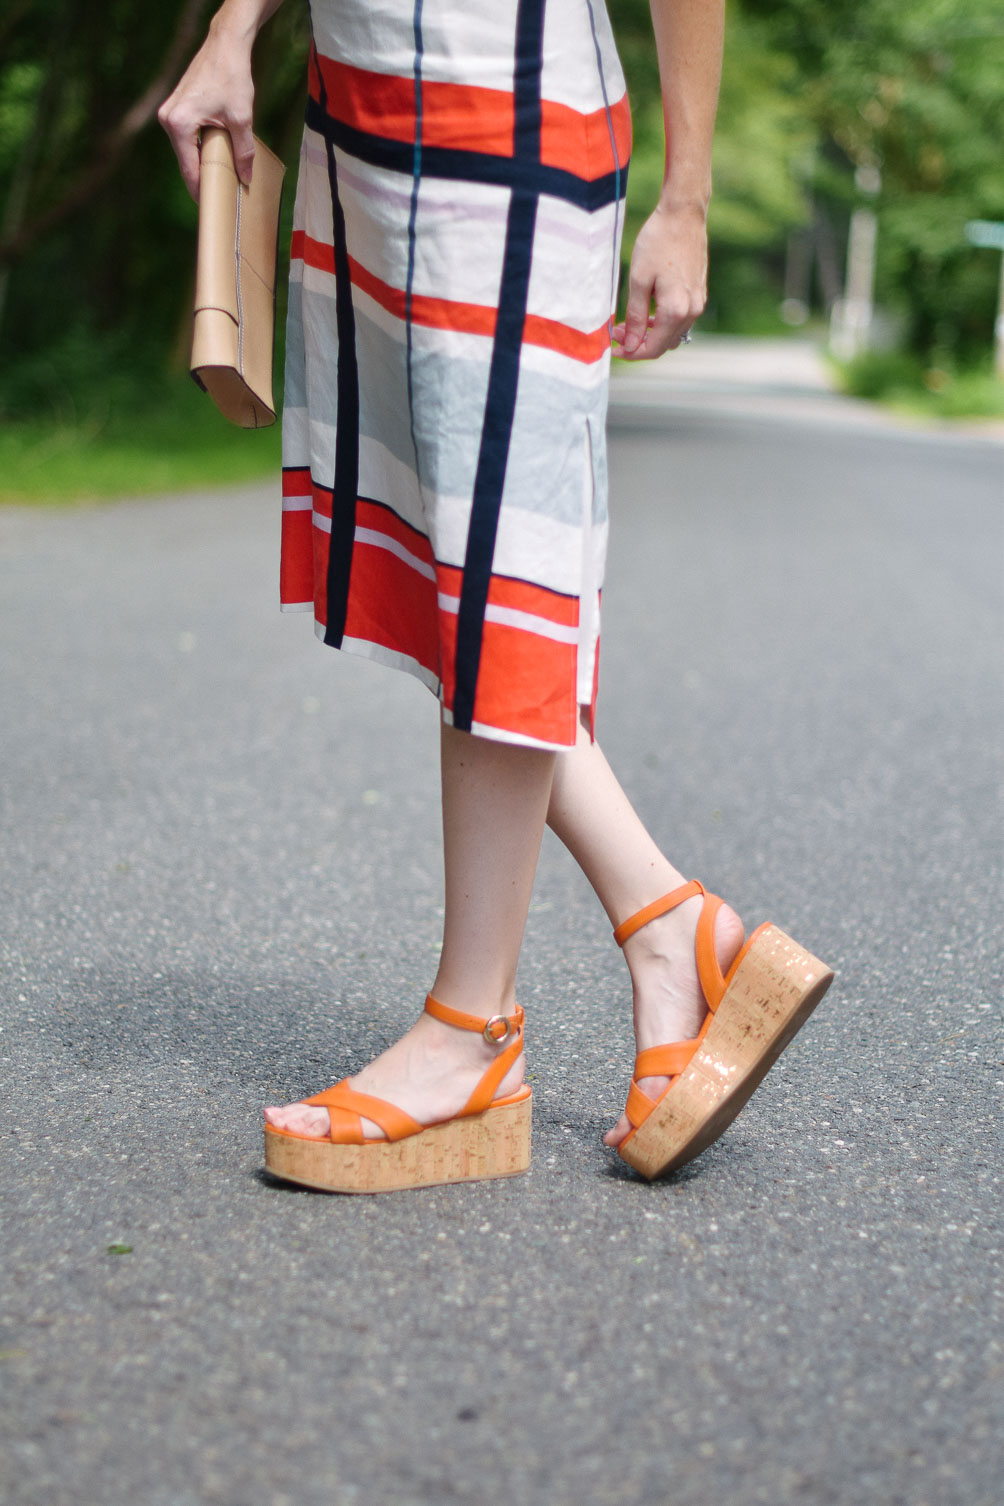 styling an Ann Taylor striped linen dress with cork wedge sandals for easy summer style